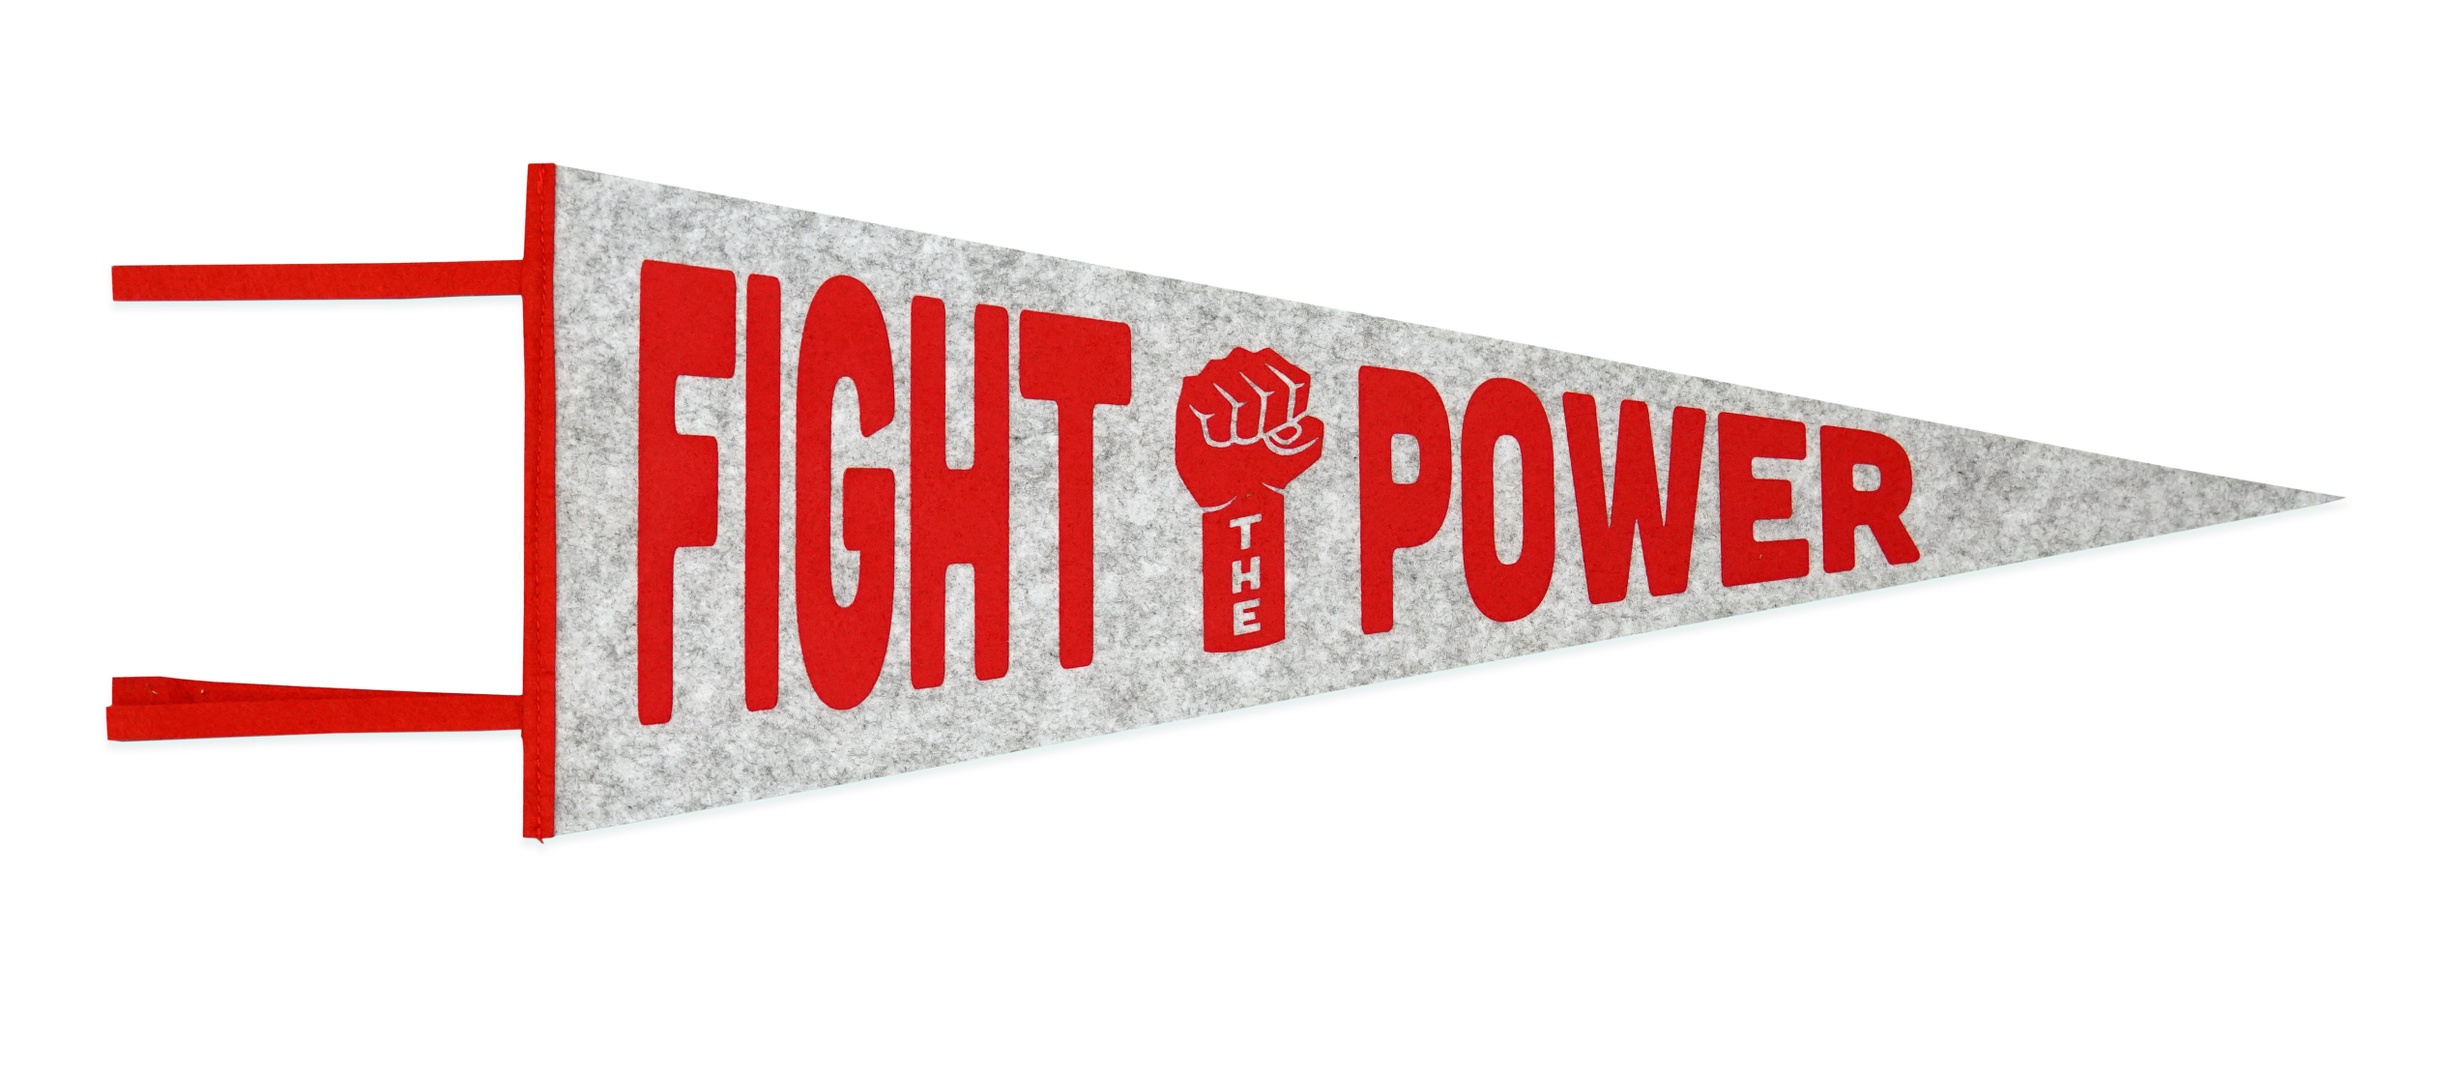 A Grey pennant with red words that say “Fight the Power” with the word “the” written inside a fist.